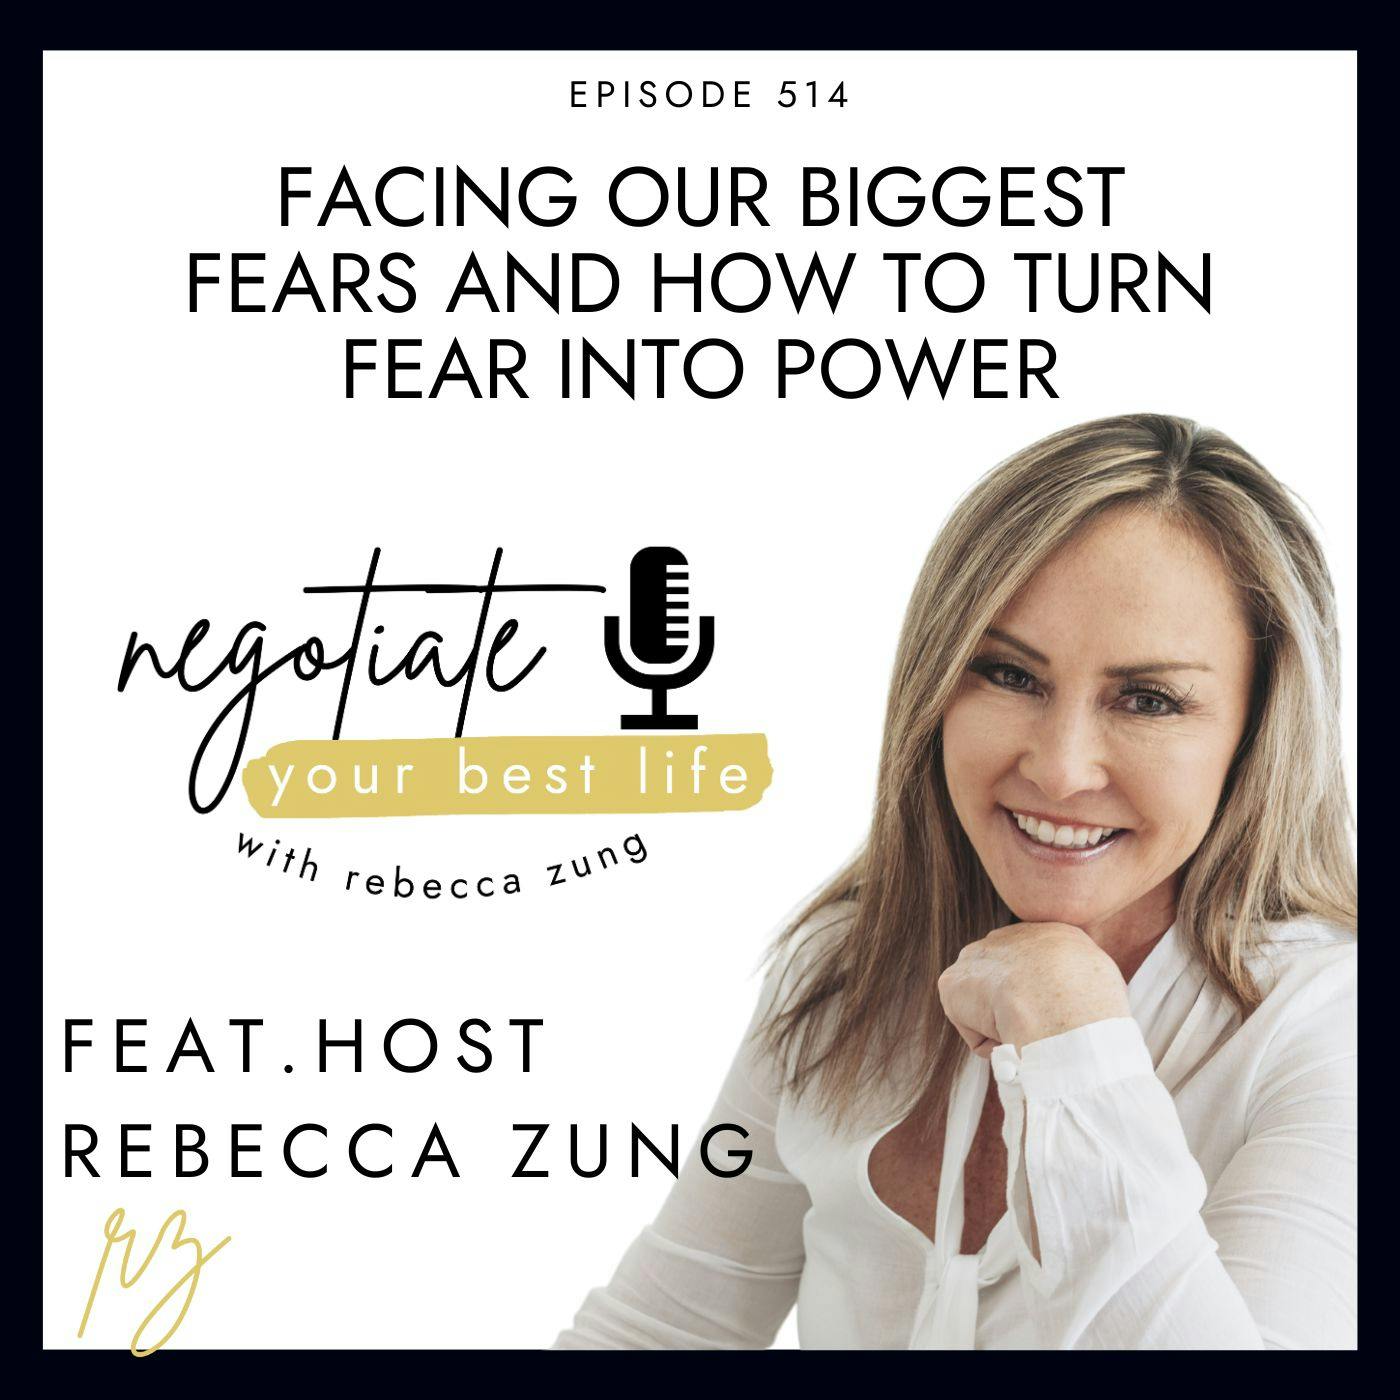 Facing Our BIGGEST Fears!! And How To Turn Fear Into Power with Rebecca Zung on Negotiate Your Best Life #514